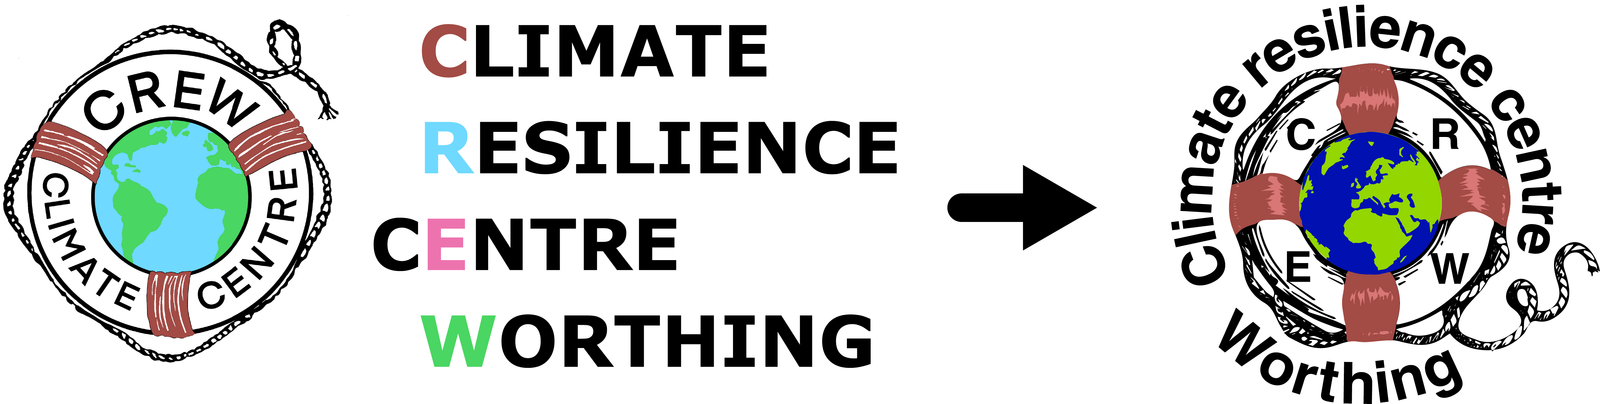 Climate resilience centre Worthing_logo_update1-01